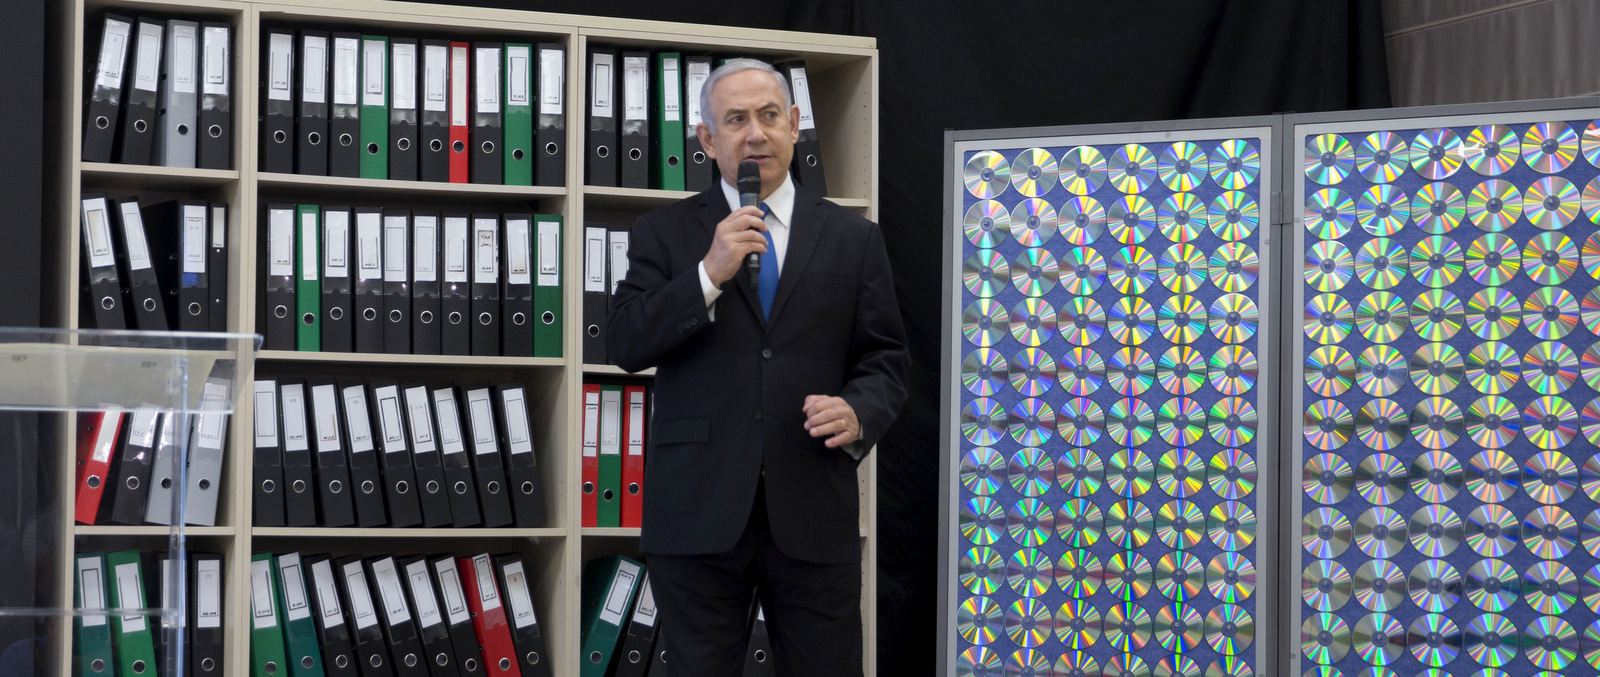 Israeli Prime Minister Benjamin Netanyahu presents material he claims comes from on Iranian nuclear weapons development during a press conference in in Tel Aviv, Israel, April 30, 2018. (AP/Sebastian Scheiner)